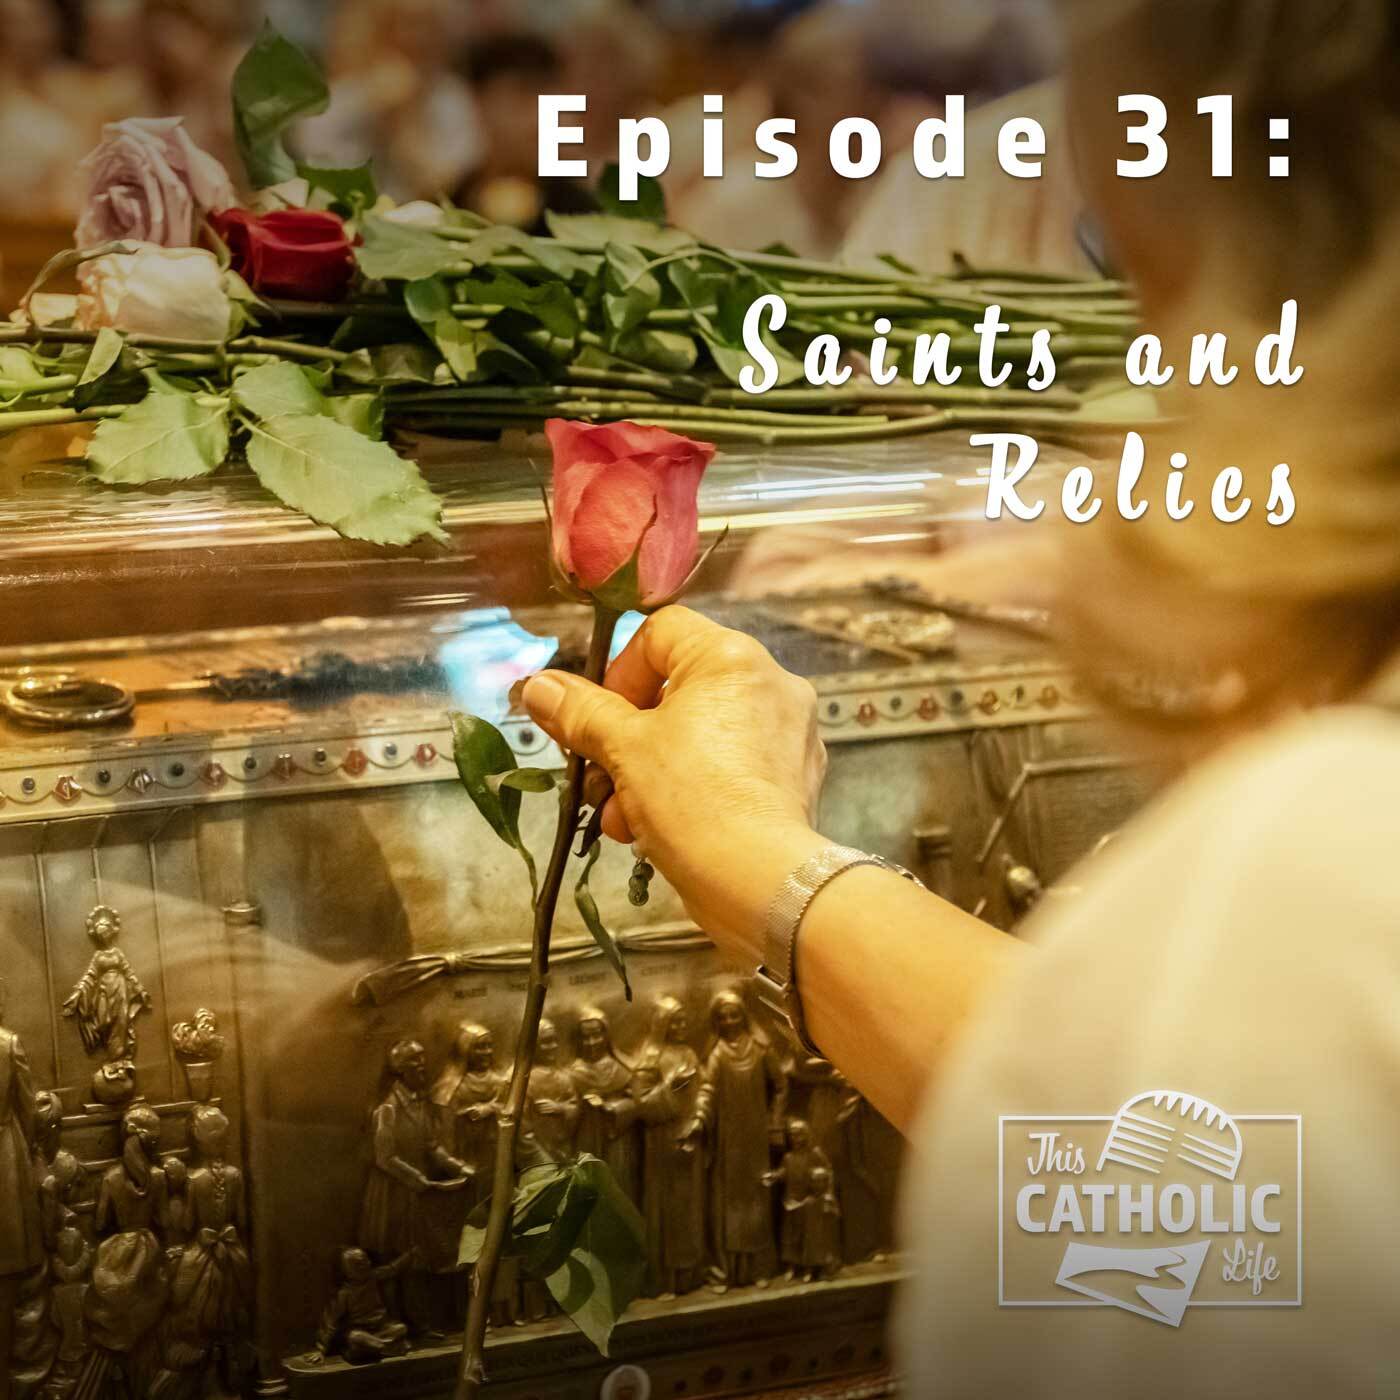 This-Catholic-Life-Podcast_EP31_Saints-and-Relics_1400x1400.jpg